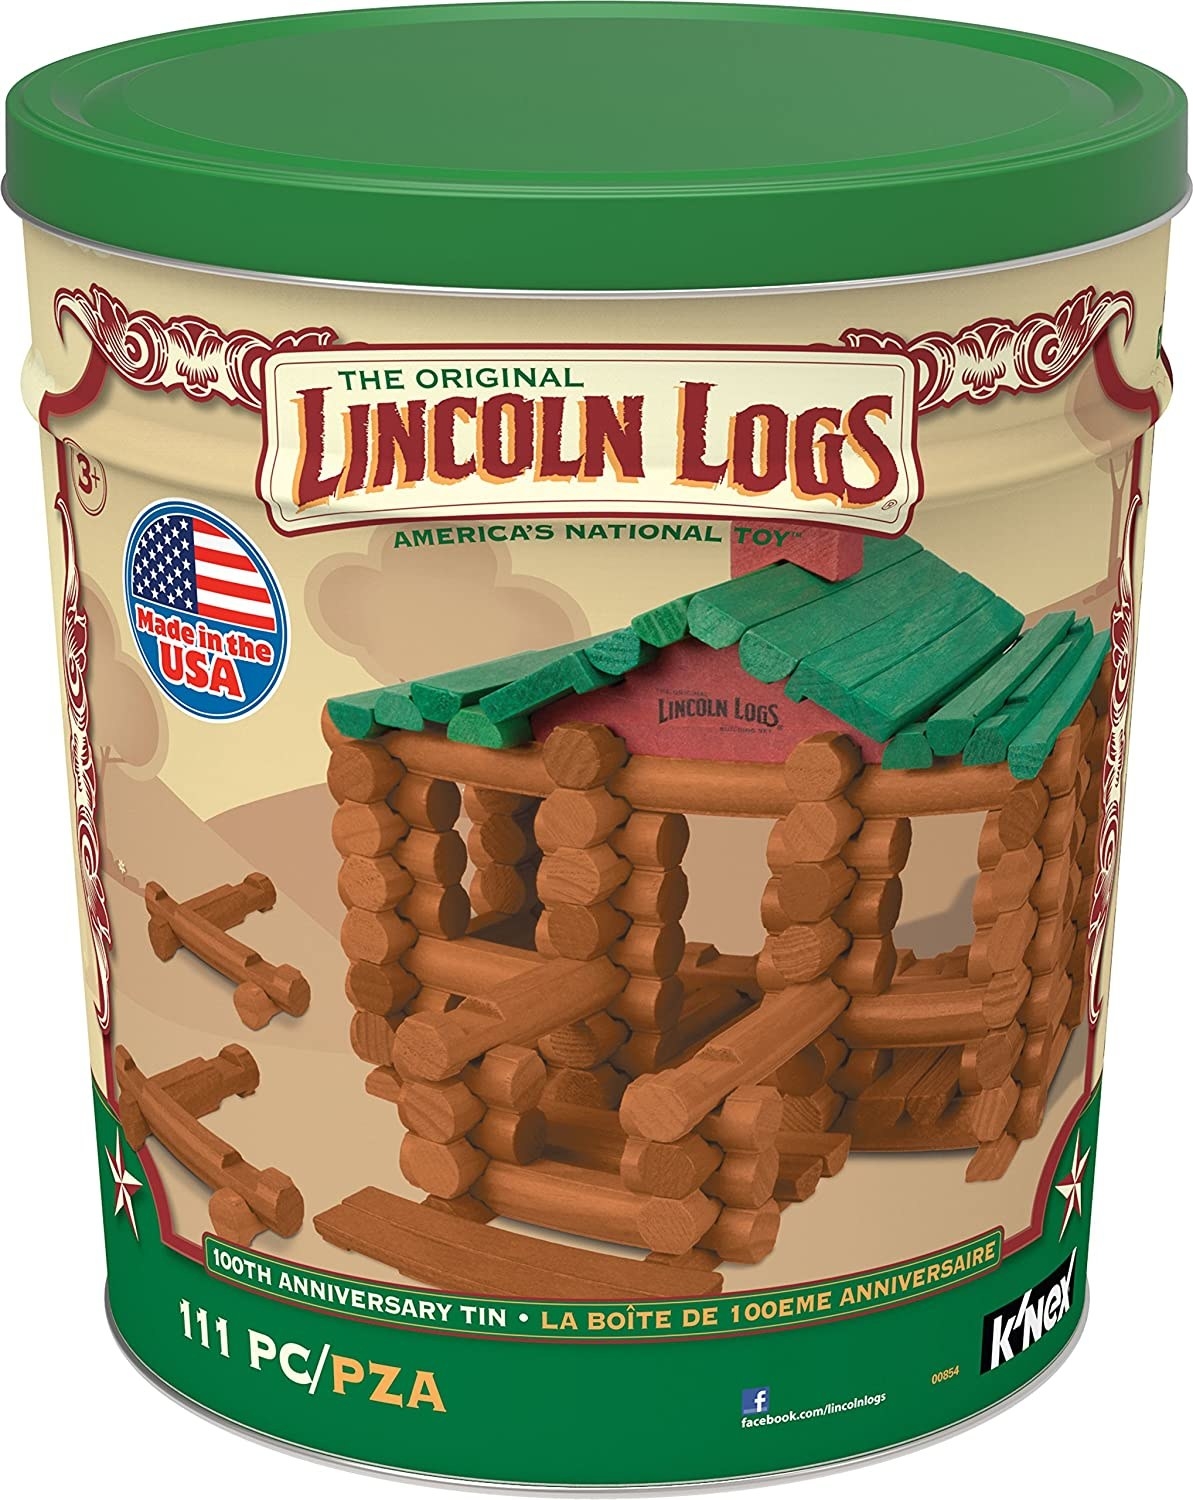 A large round green tin filled with Lincoln logs